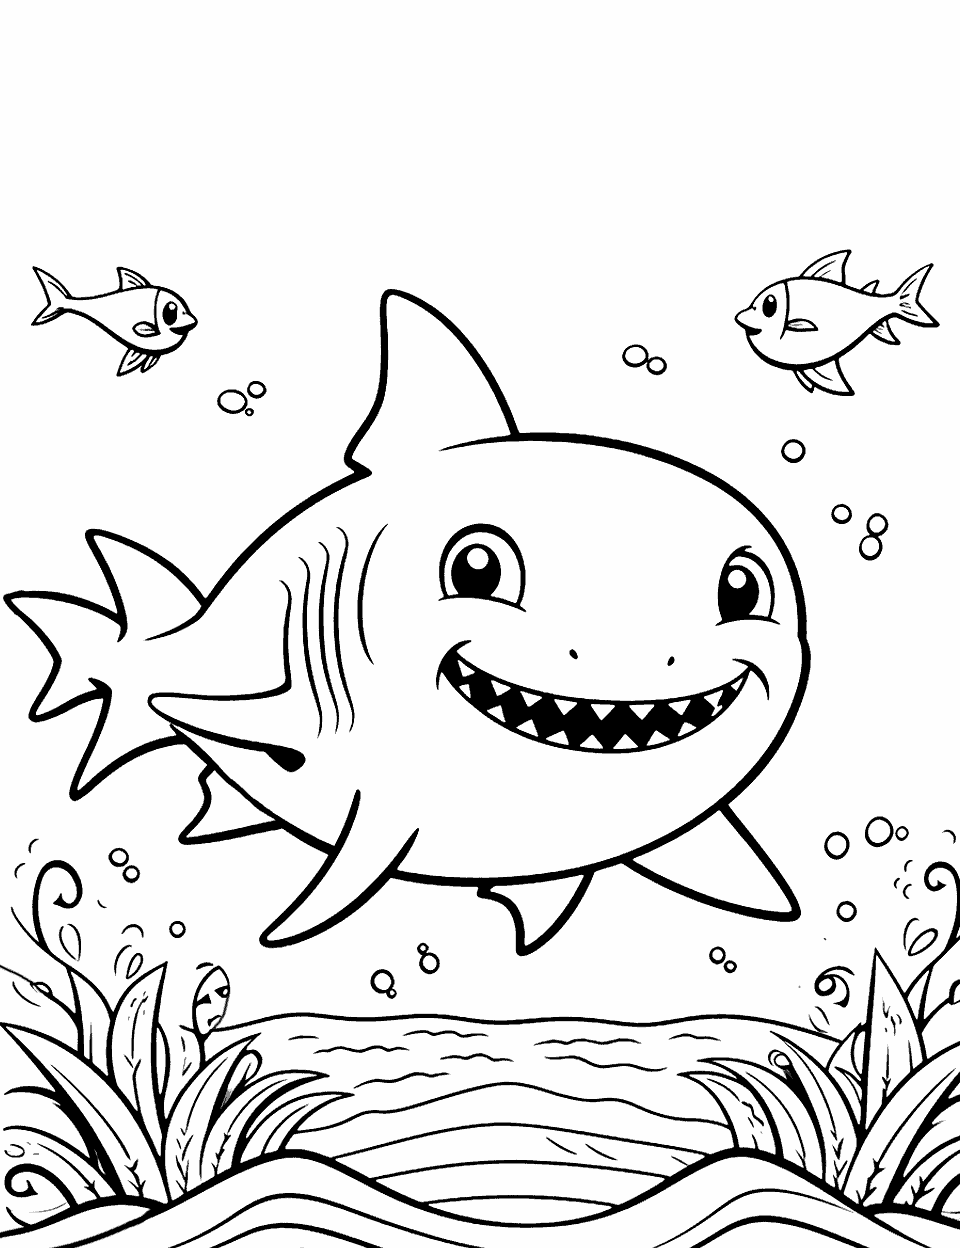 Tropical Island Baby Shark Coloring Page - Baby Shark under tropical island waters with exotic underwater plants.